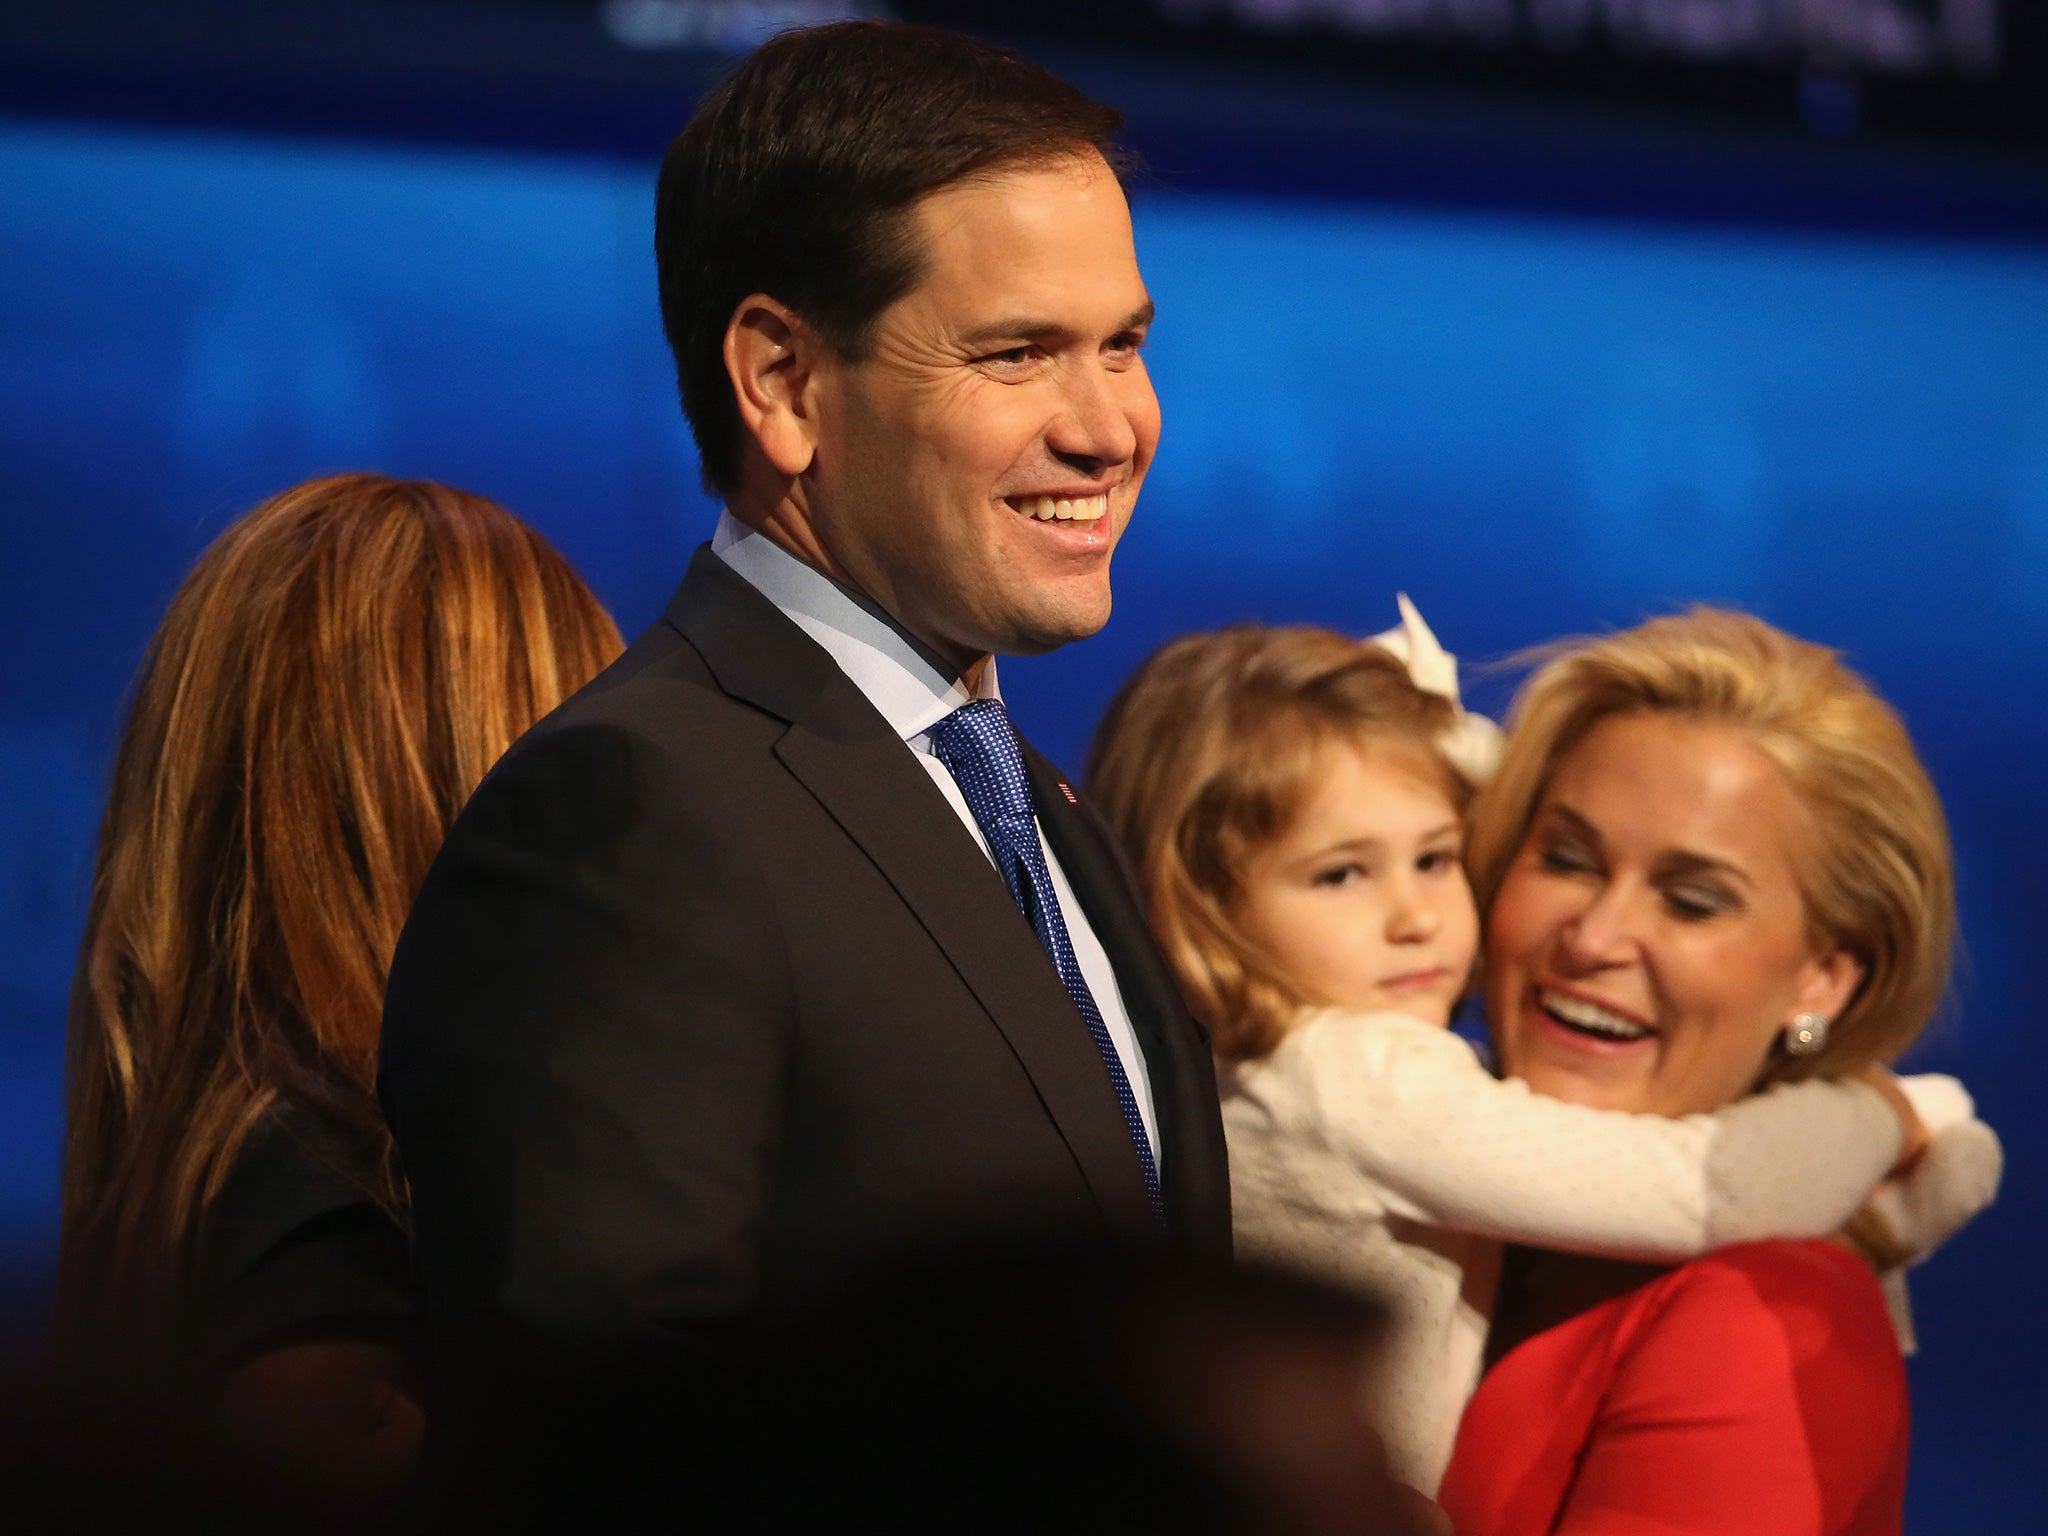 Marco Rubio, pictured on stage with family members, delivered a polished performance in which he took on Jeb Bush